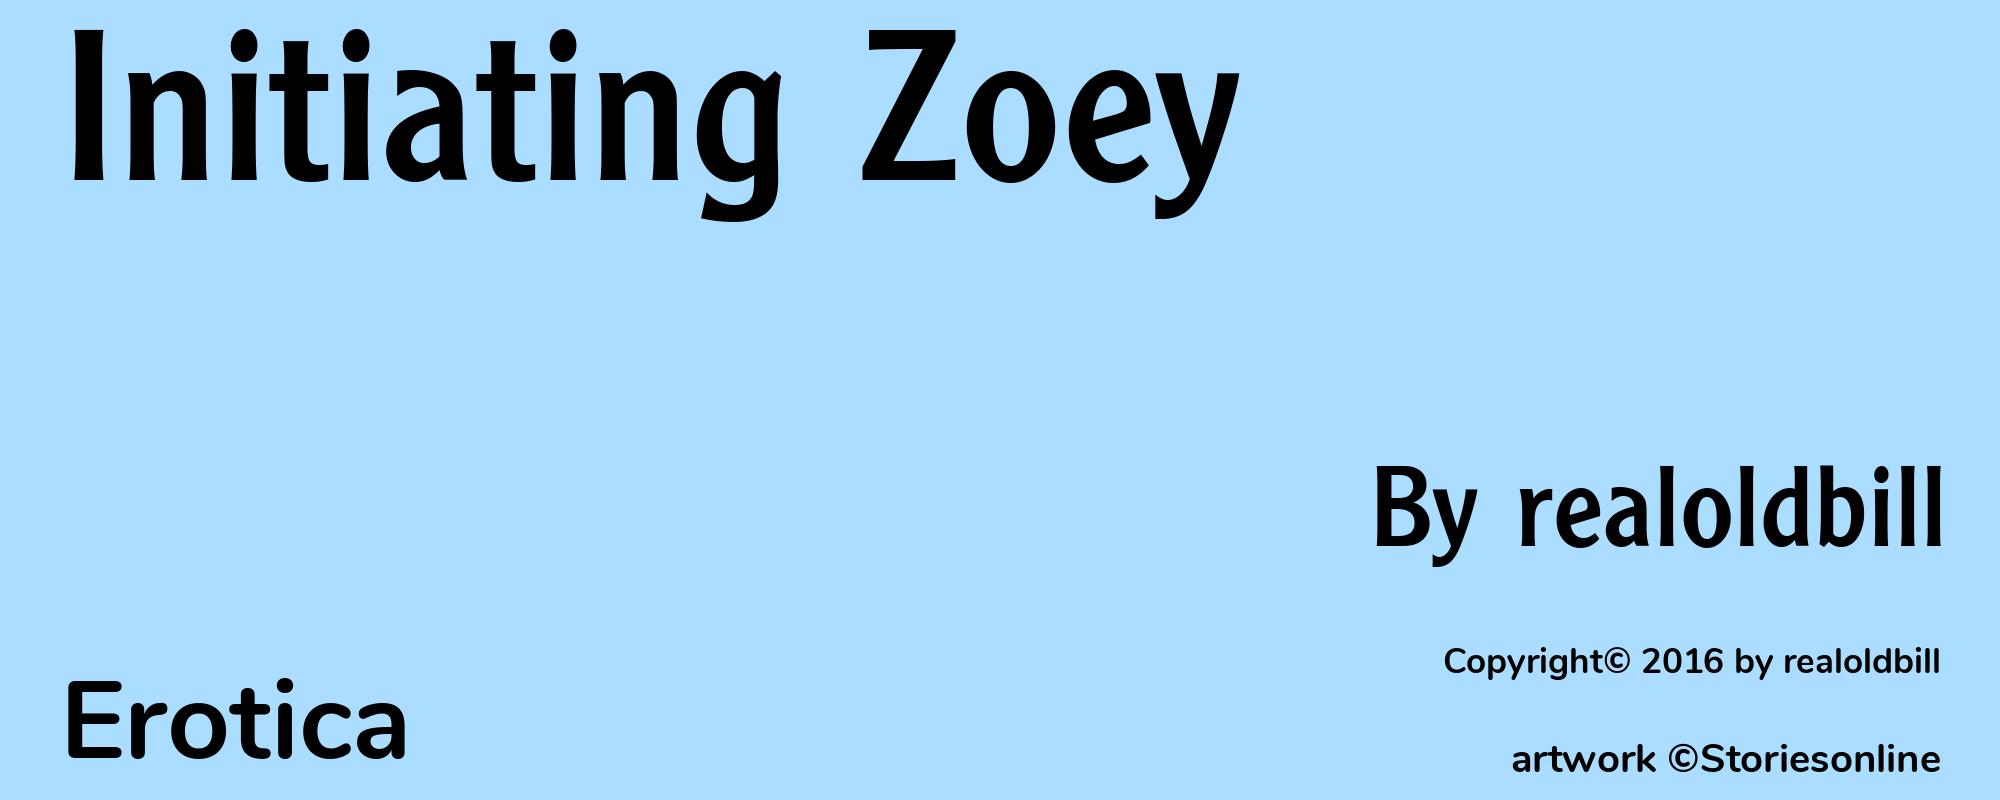 Initiating Zoey - Cover